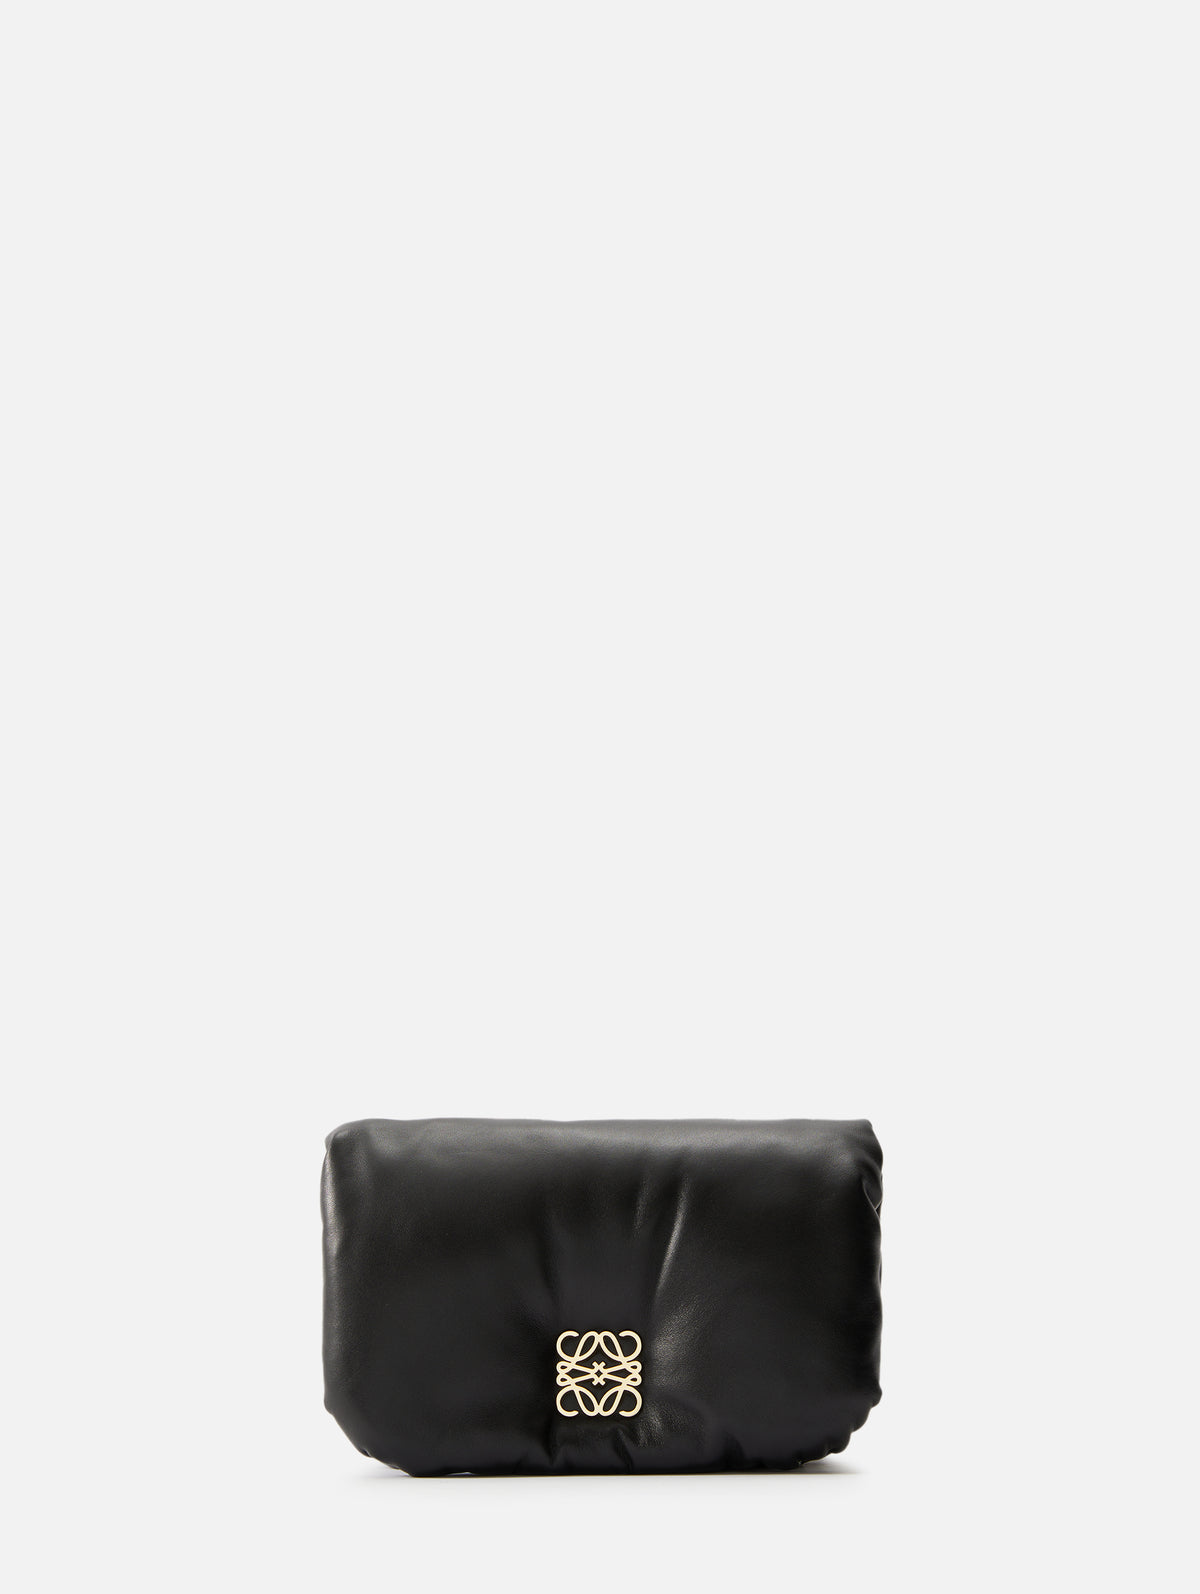 LOEWE Goya leather shoulder bag  Bags, Clothing brand, Purse outfit